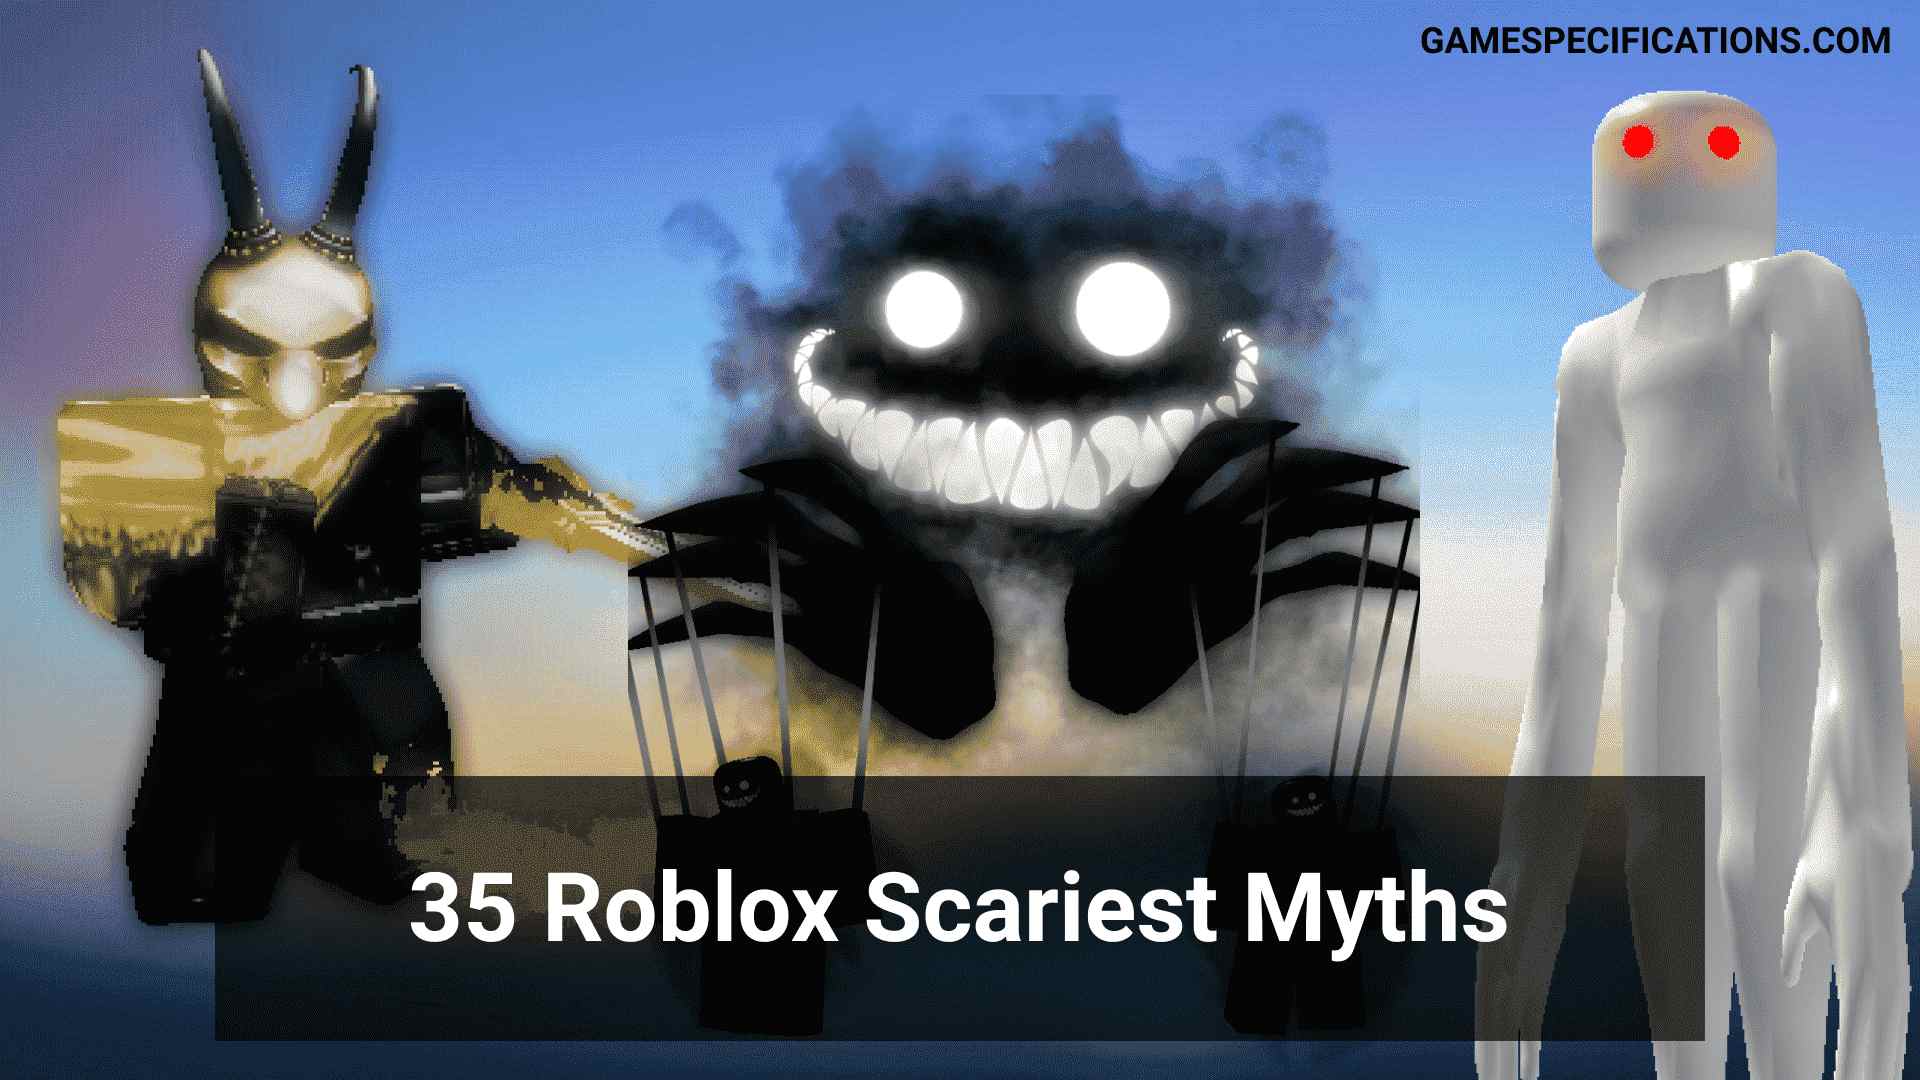 Roblox Myths A Scary Universe Of Roblox Game Specifications - itsfunneh roblox escape room